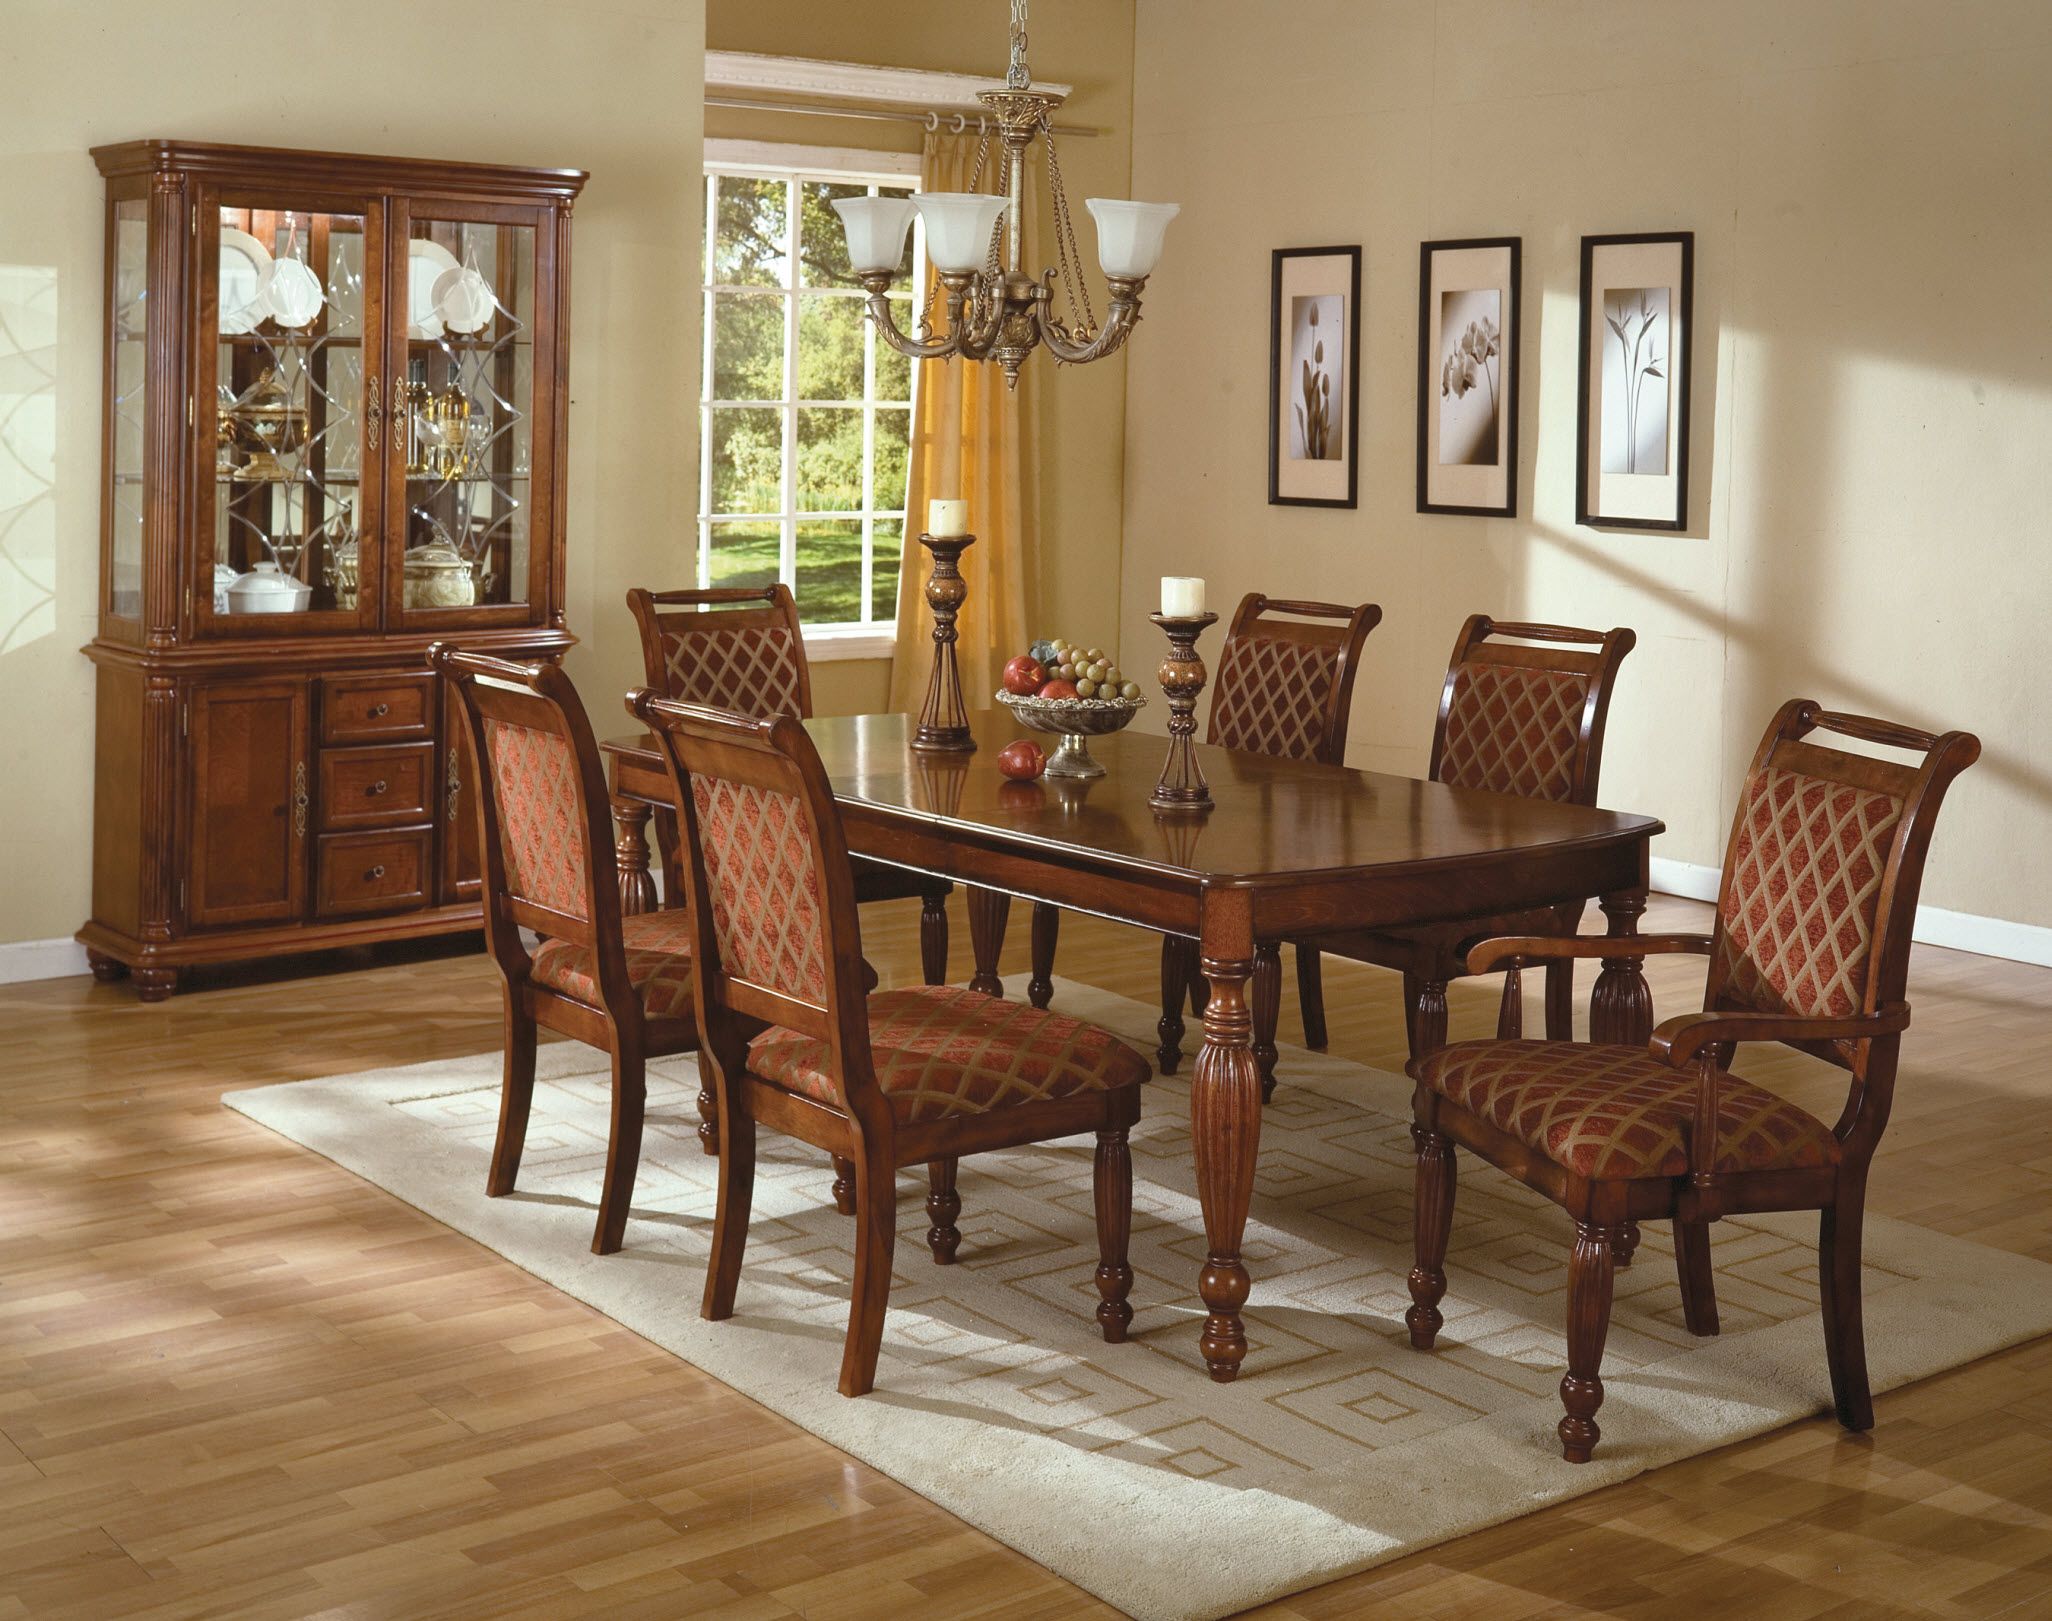 Wonderful Dining Table And Chairs